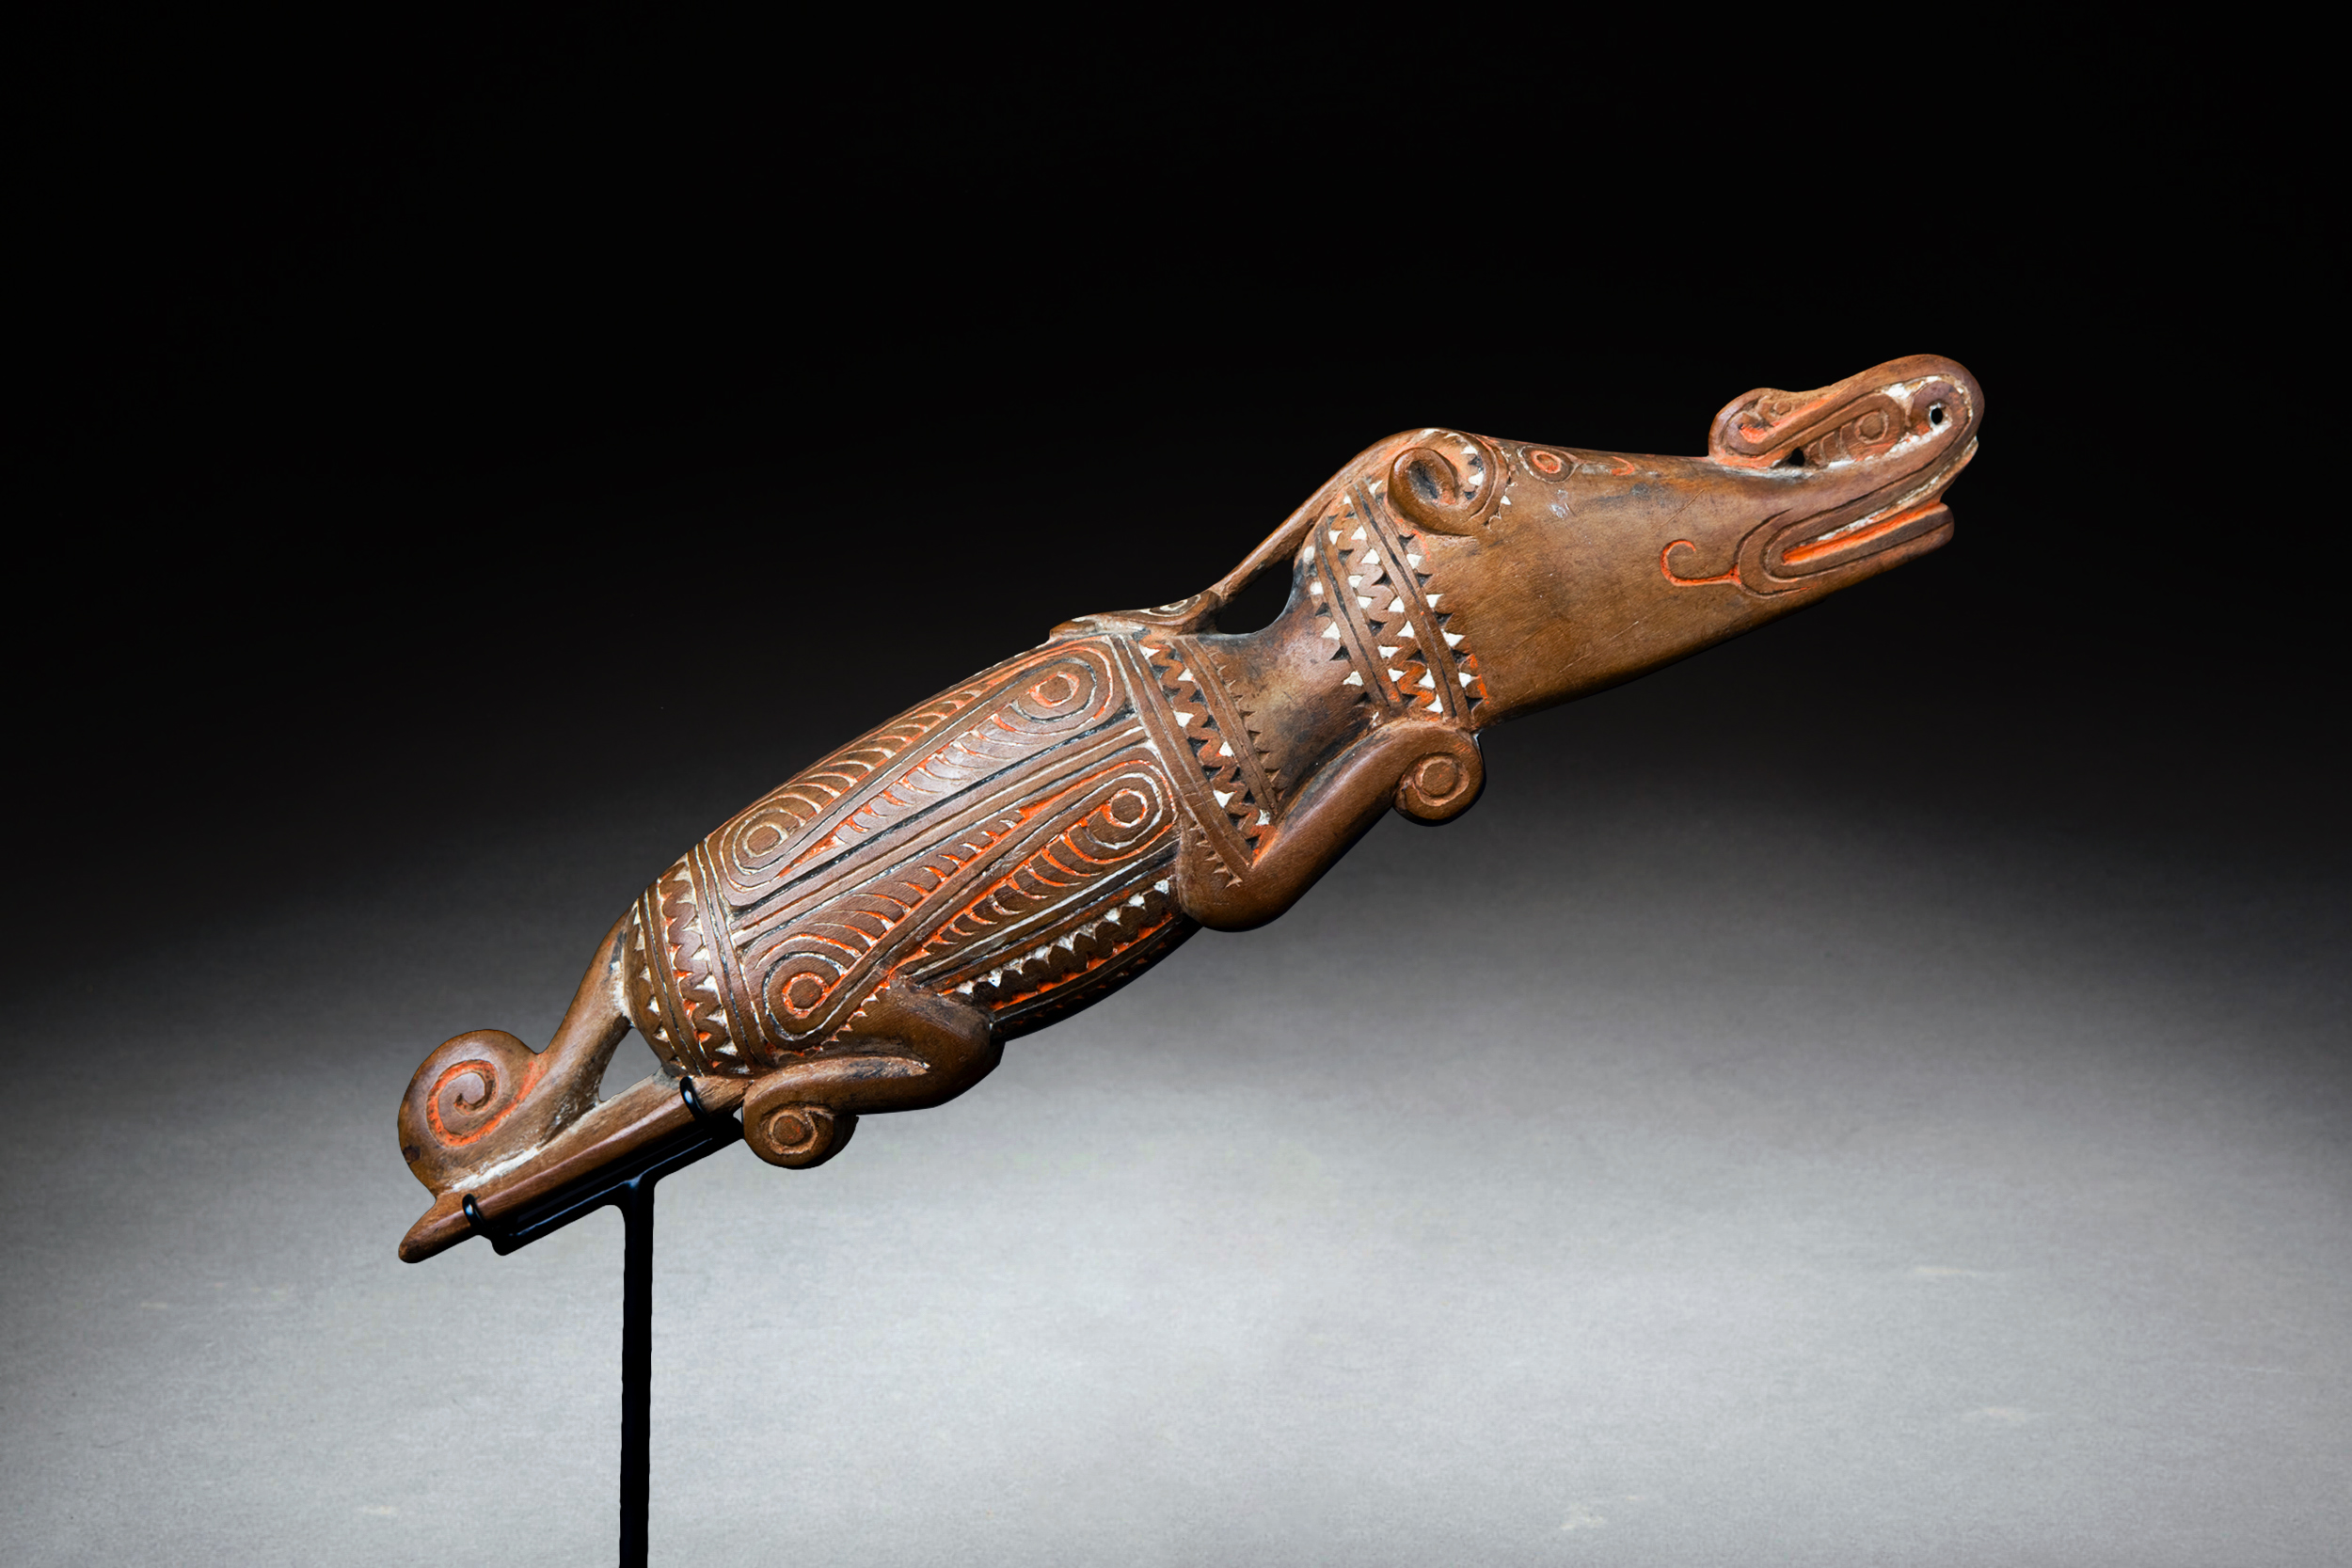 A Fine Carved Pig by the 19th Century Massim Master Carver Mutuaga